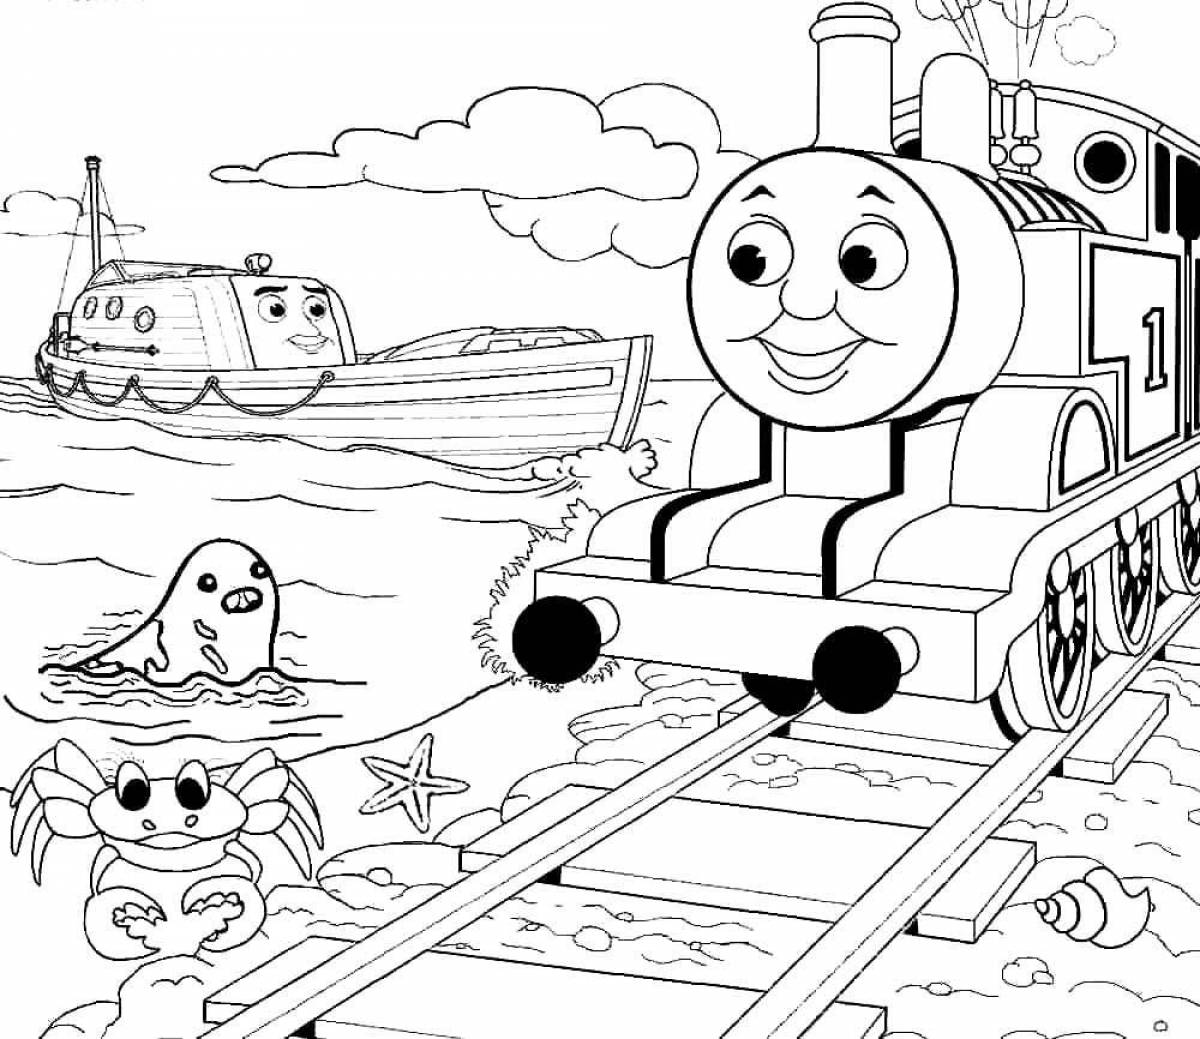 Thomas the Magnificent Engine Coloring Page